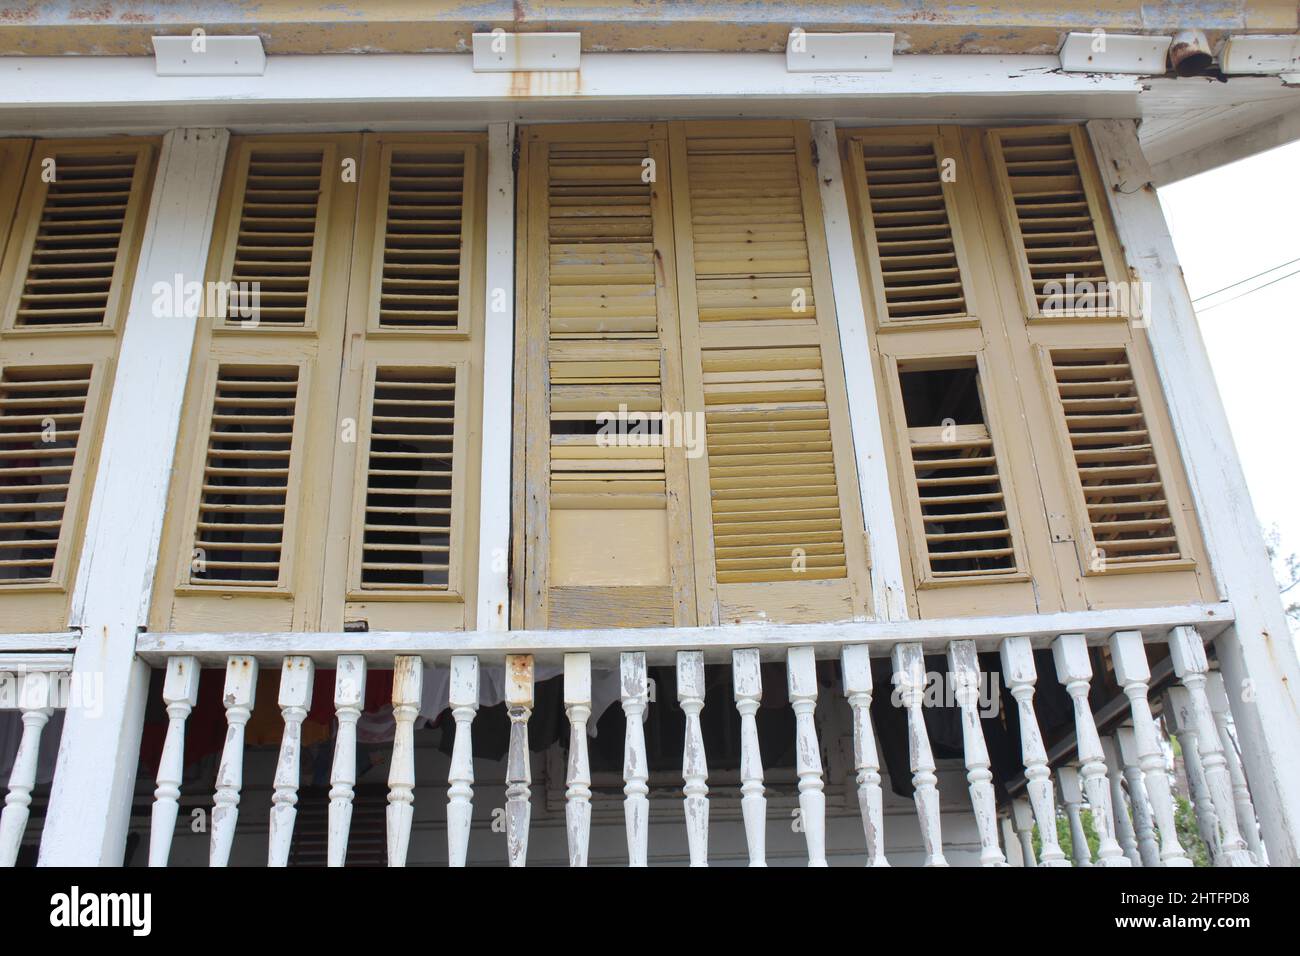 BELIZE CITY, BELIZE - SEPTEMBER 24, 2016 traditional wooden houses with yellow painted louvered windows in downtown Belize City Stock Photo